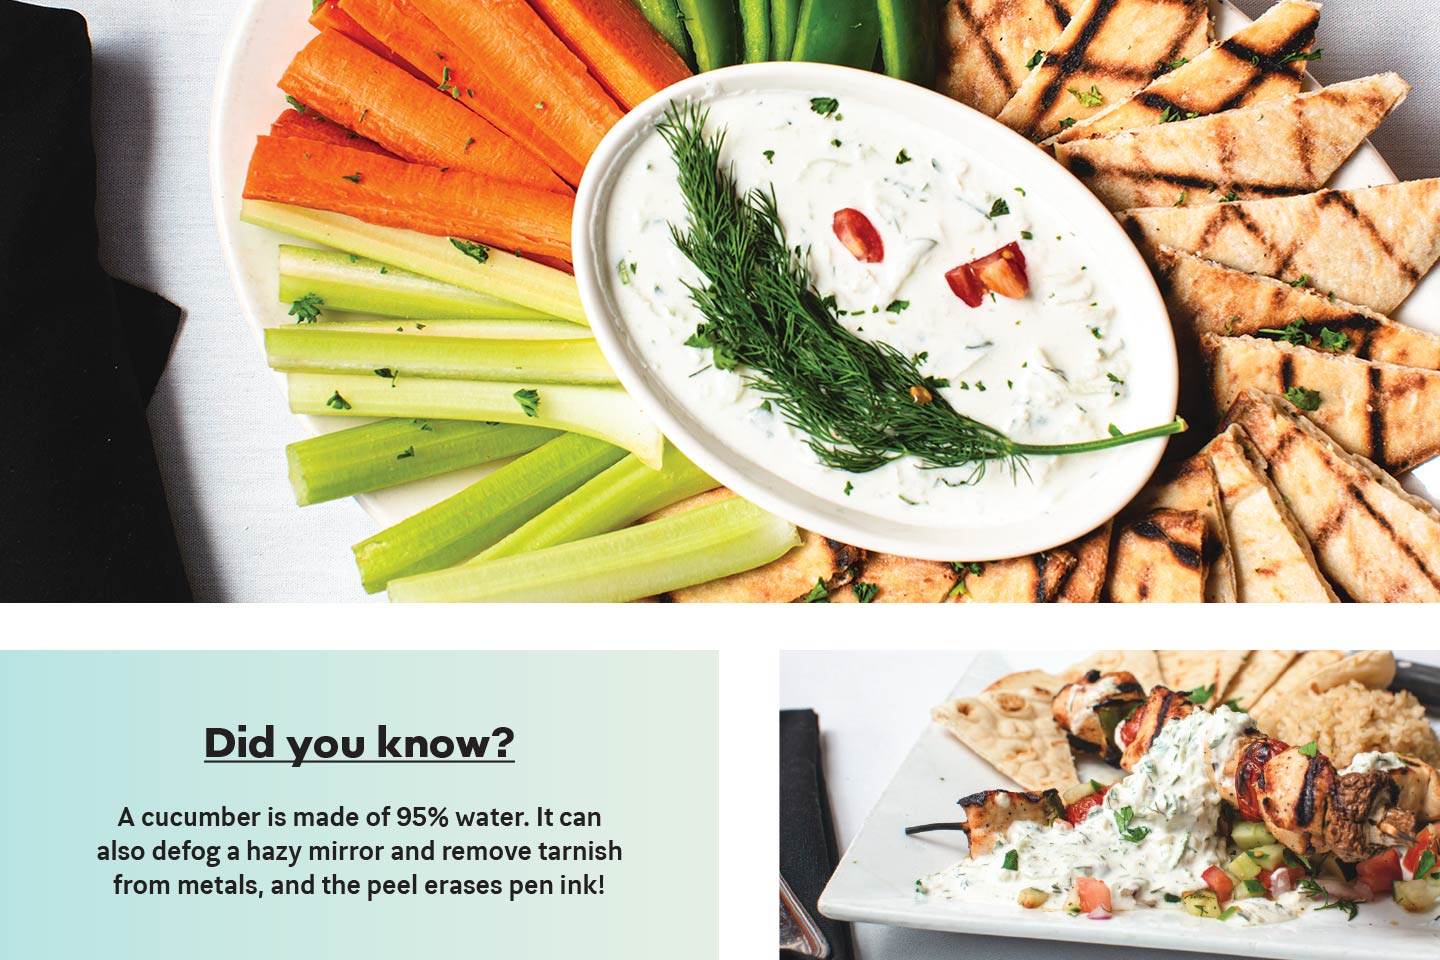 Acropolis Grill's Tzatziki sauce with pita, veggies, and meat; Did you know? A cucumber is made of 95% water. It can also defog a hazy mirror and remove tarnish from metals, and the peel erases pen ink!